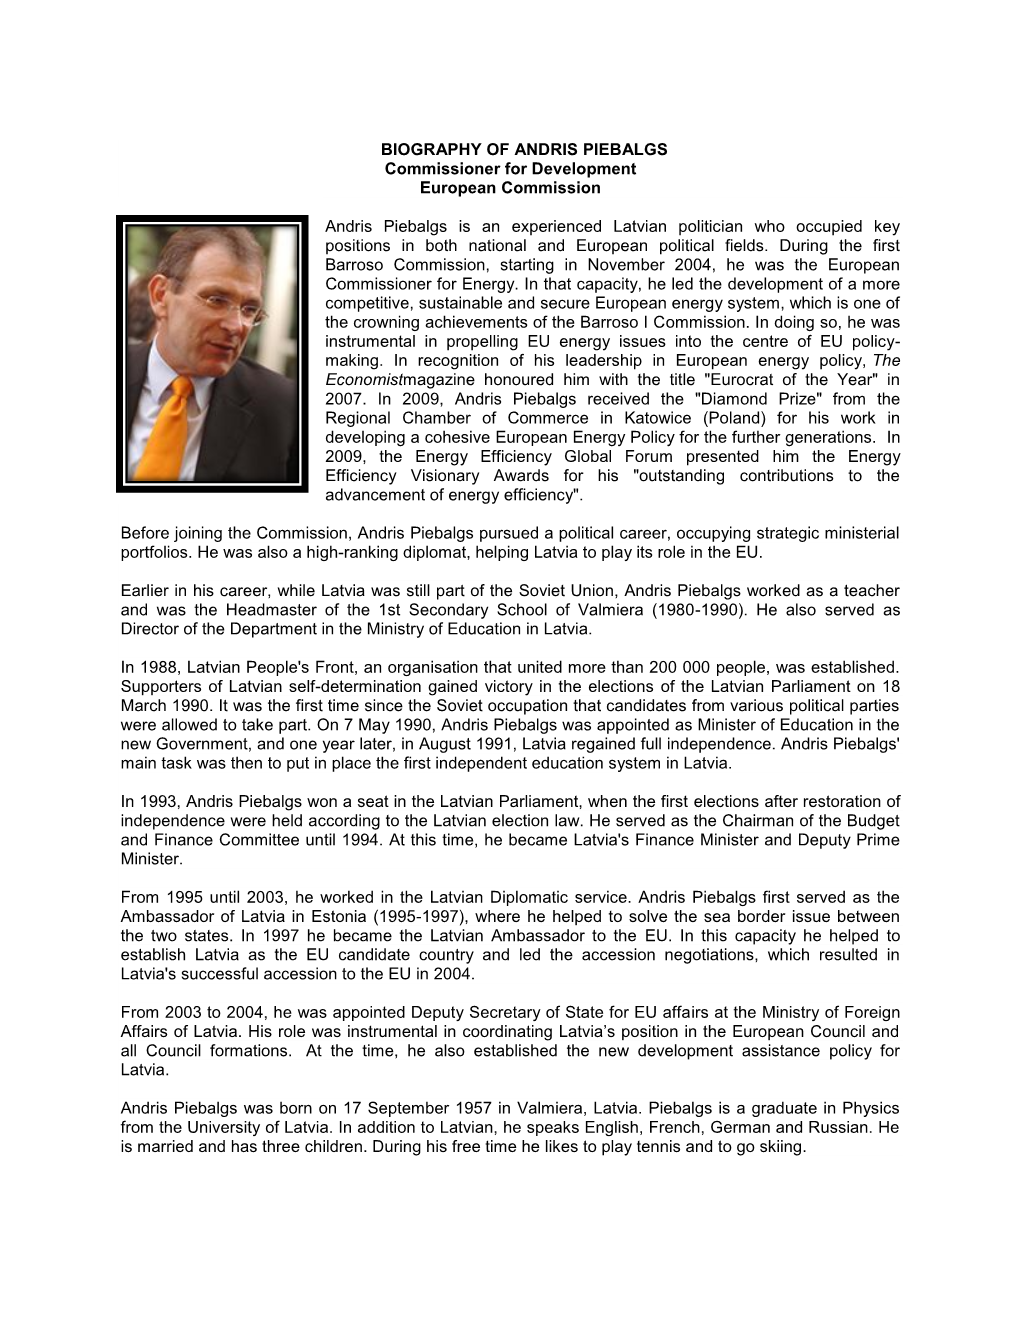 Biography of Andris Piebalgs: Commissioner for Development